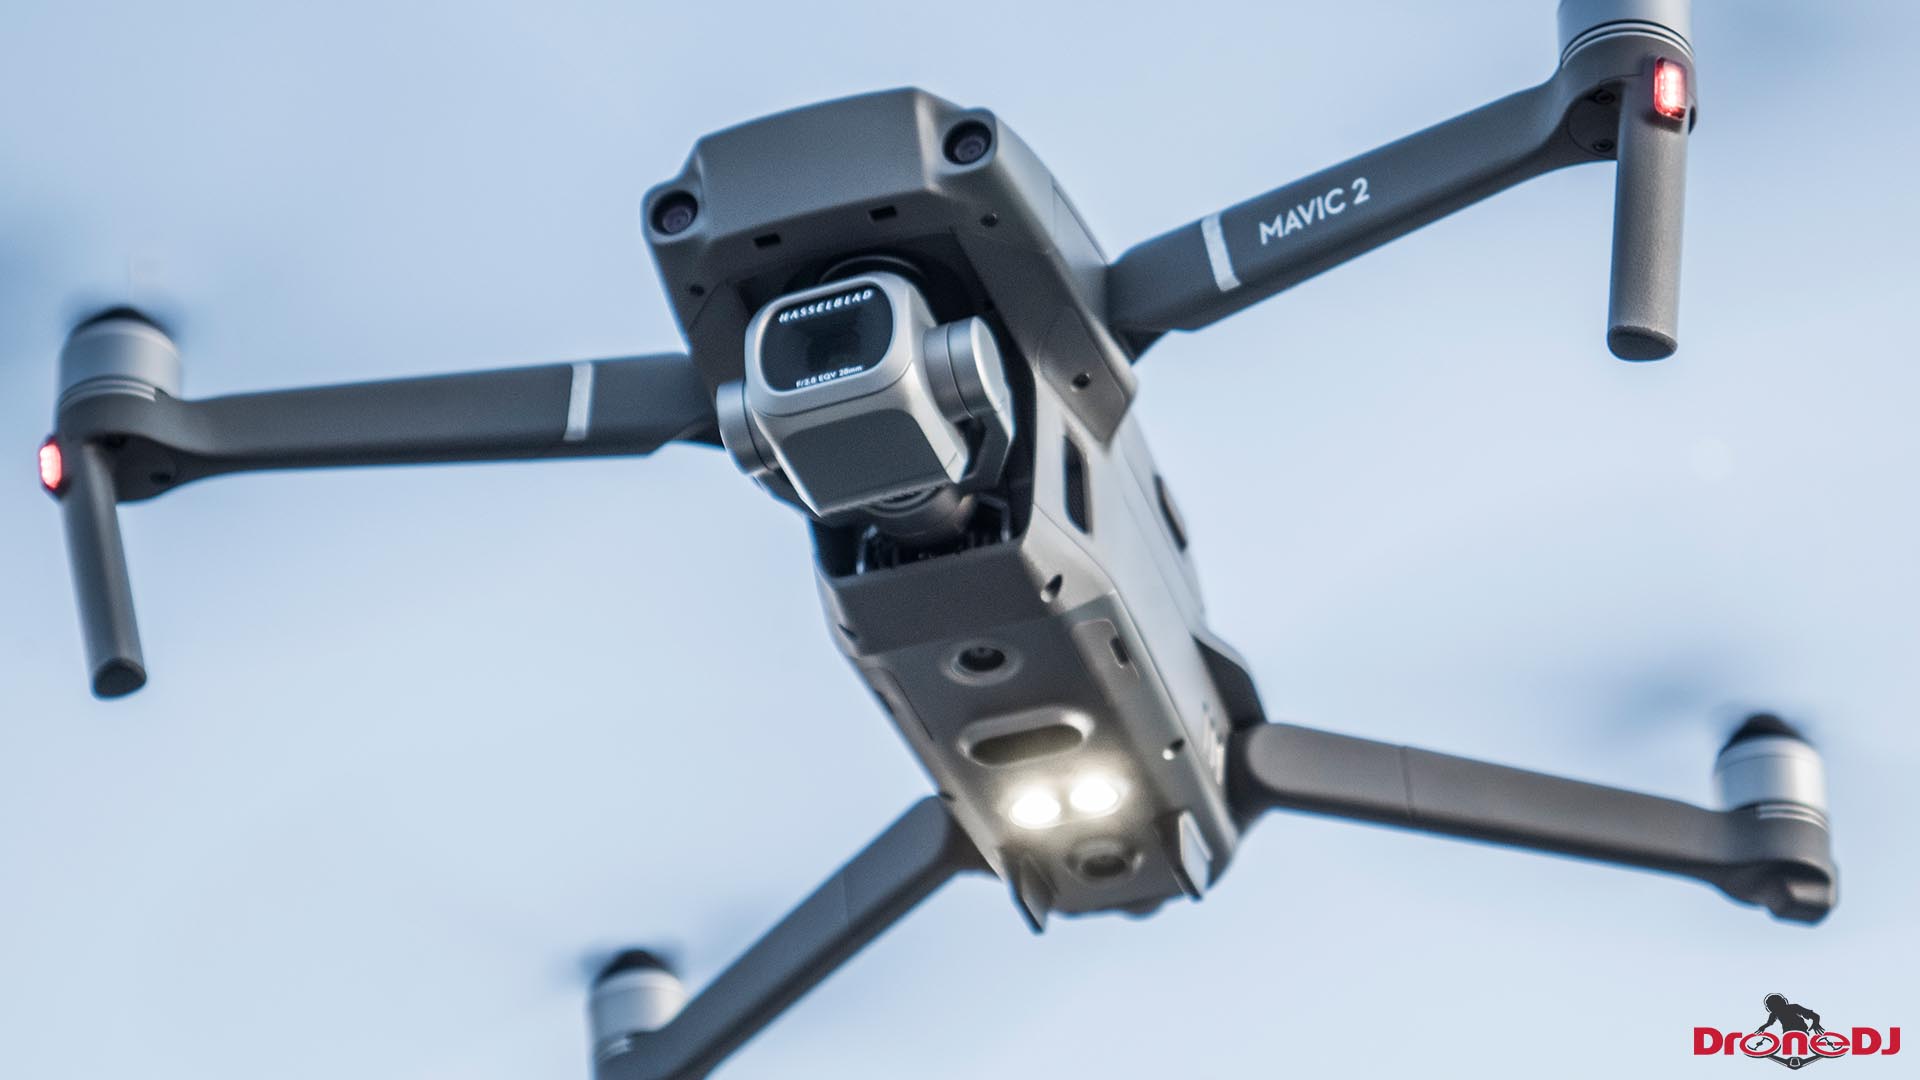 The Mavic 2's top 6 features that aren't getting enough attention